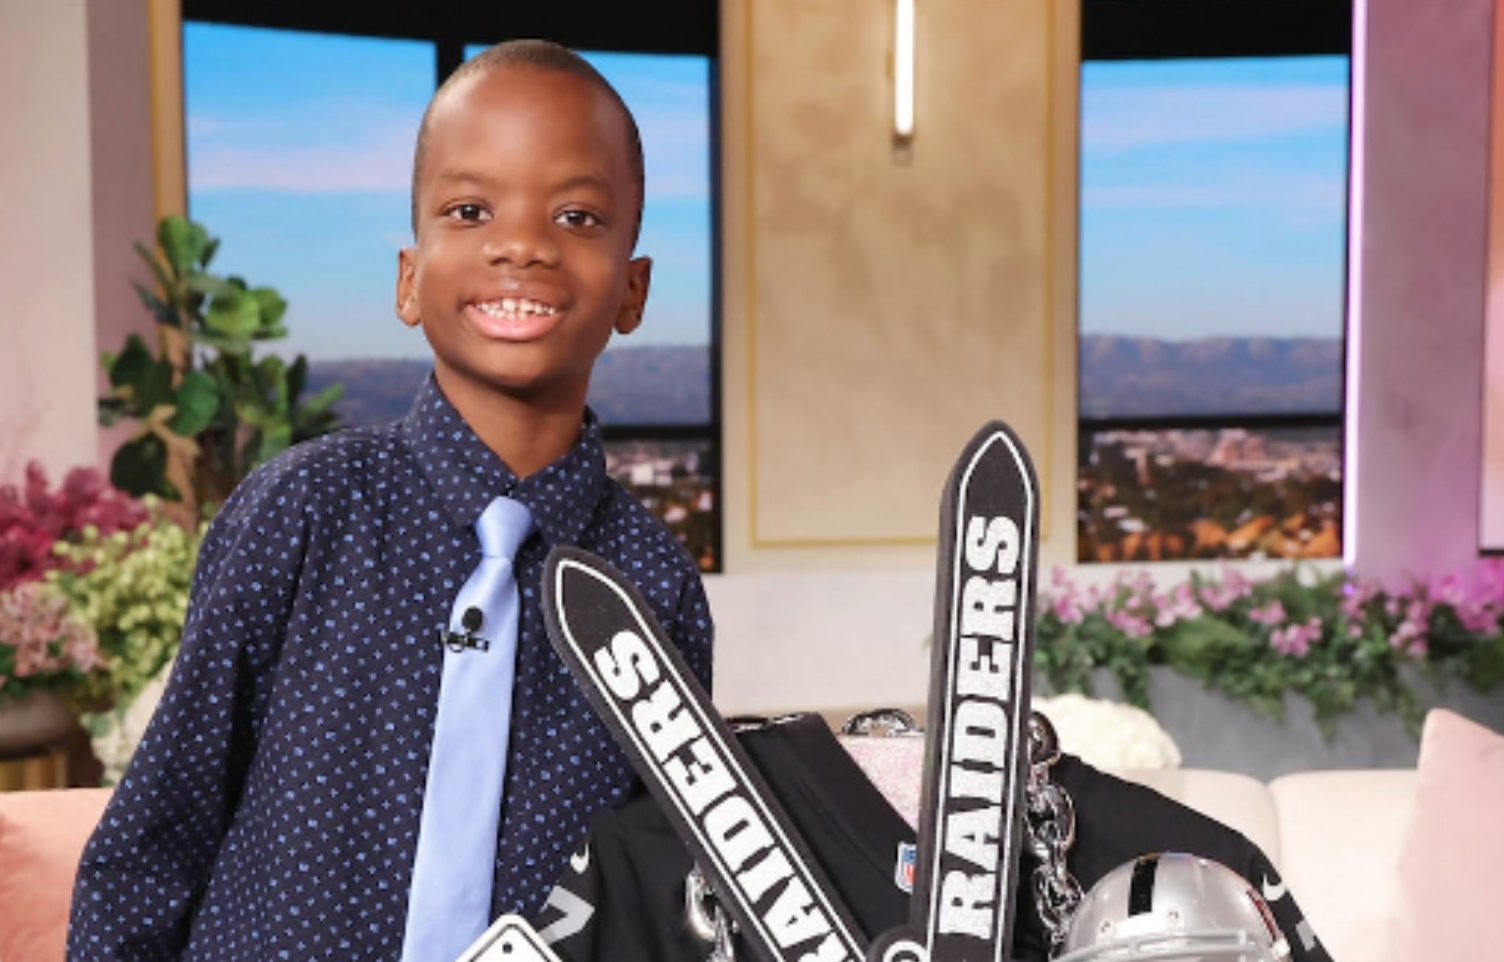 Meet Jeremiah Fennell: The 11-Year-Old Reporter Living His Dream